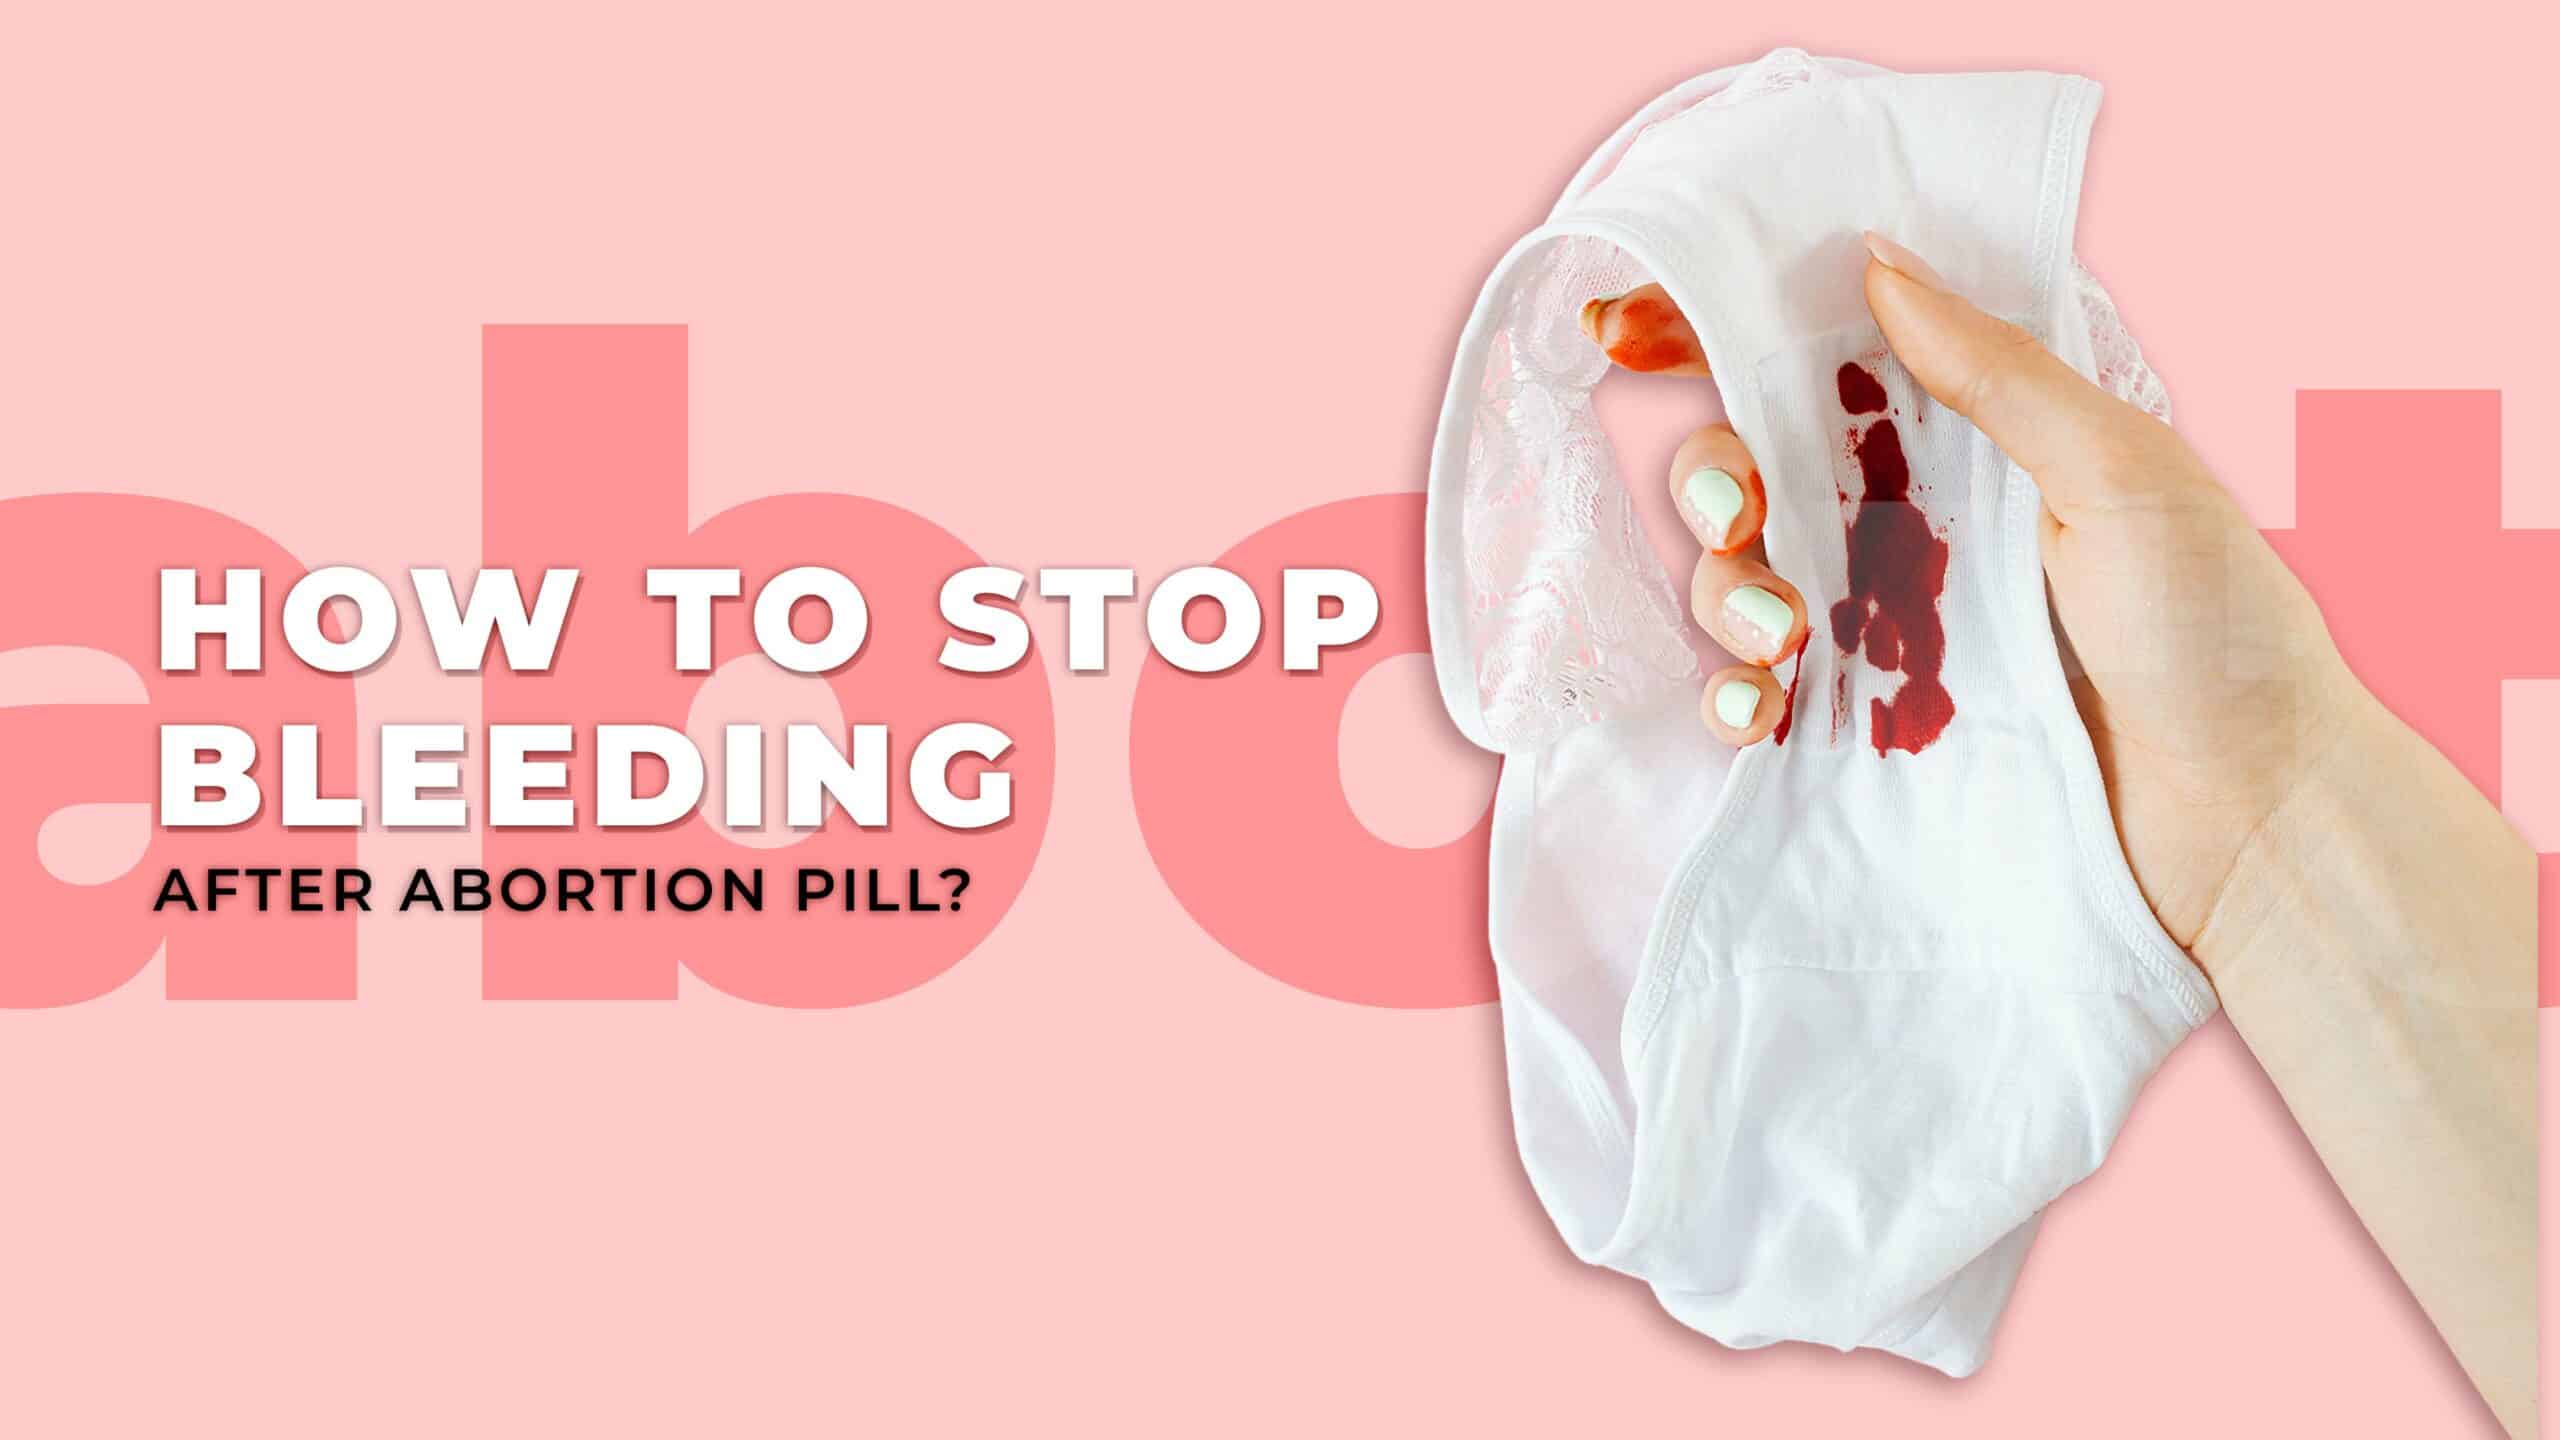 How to stop bleeding after abortion pill